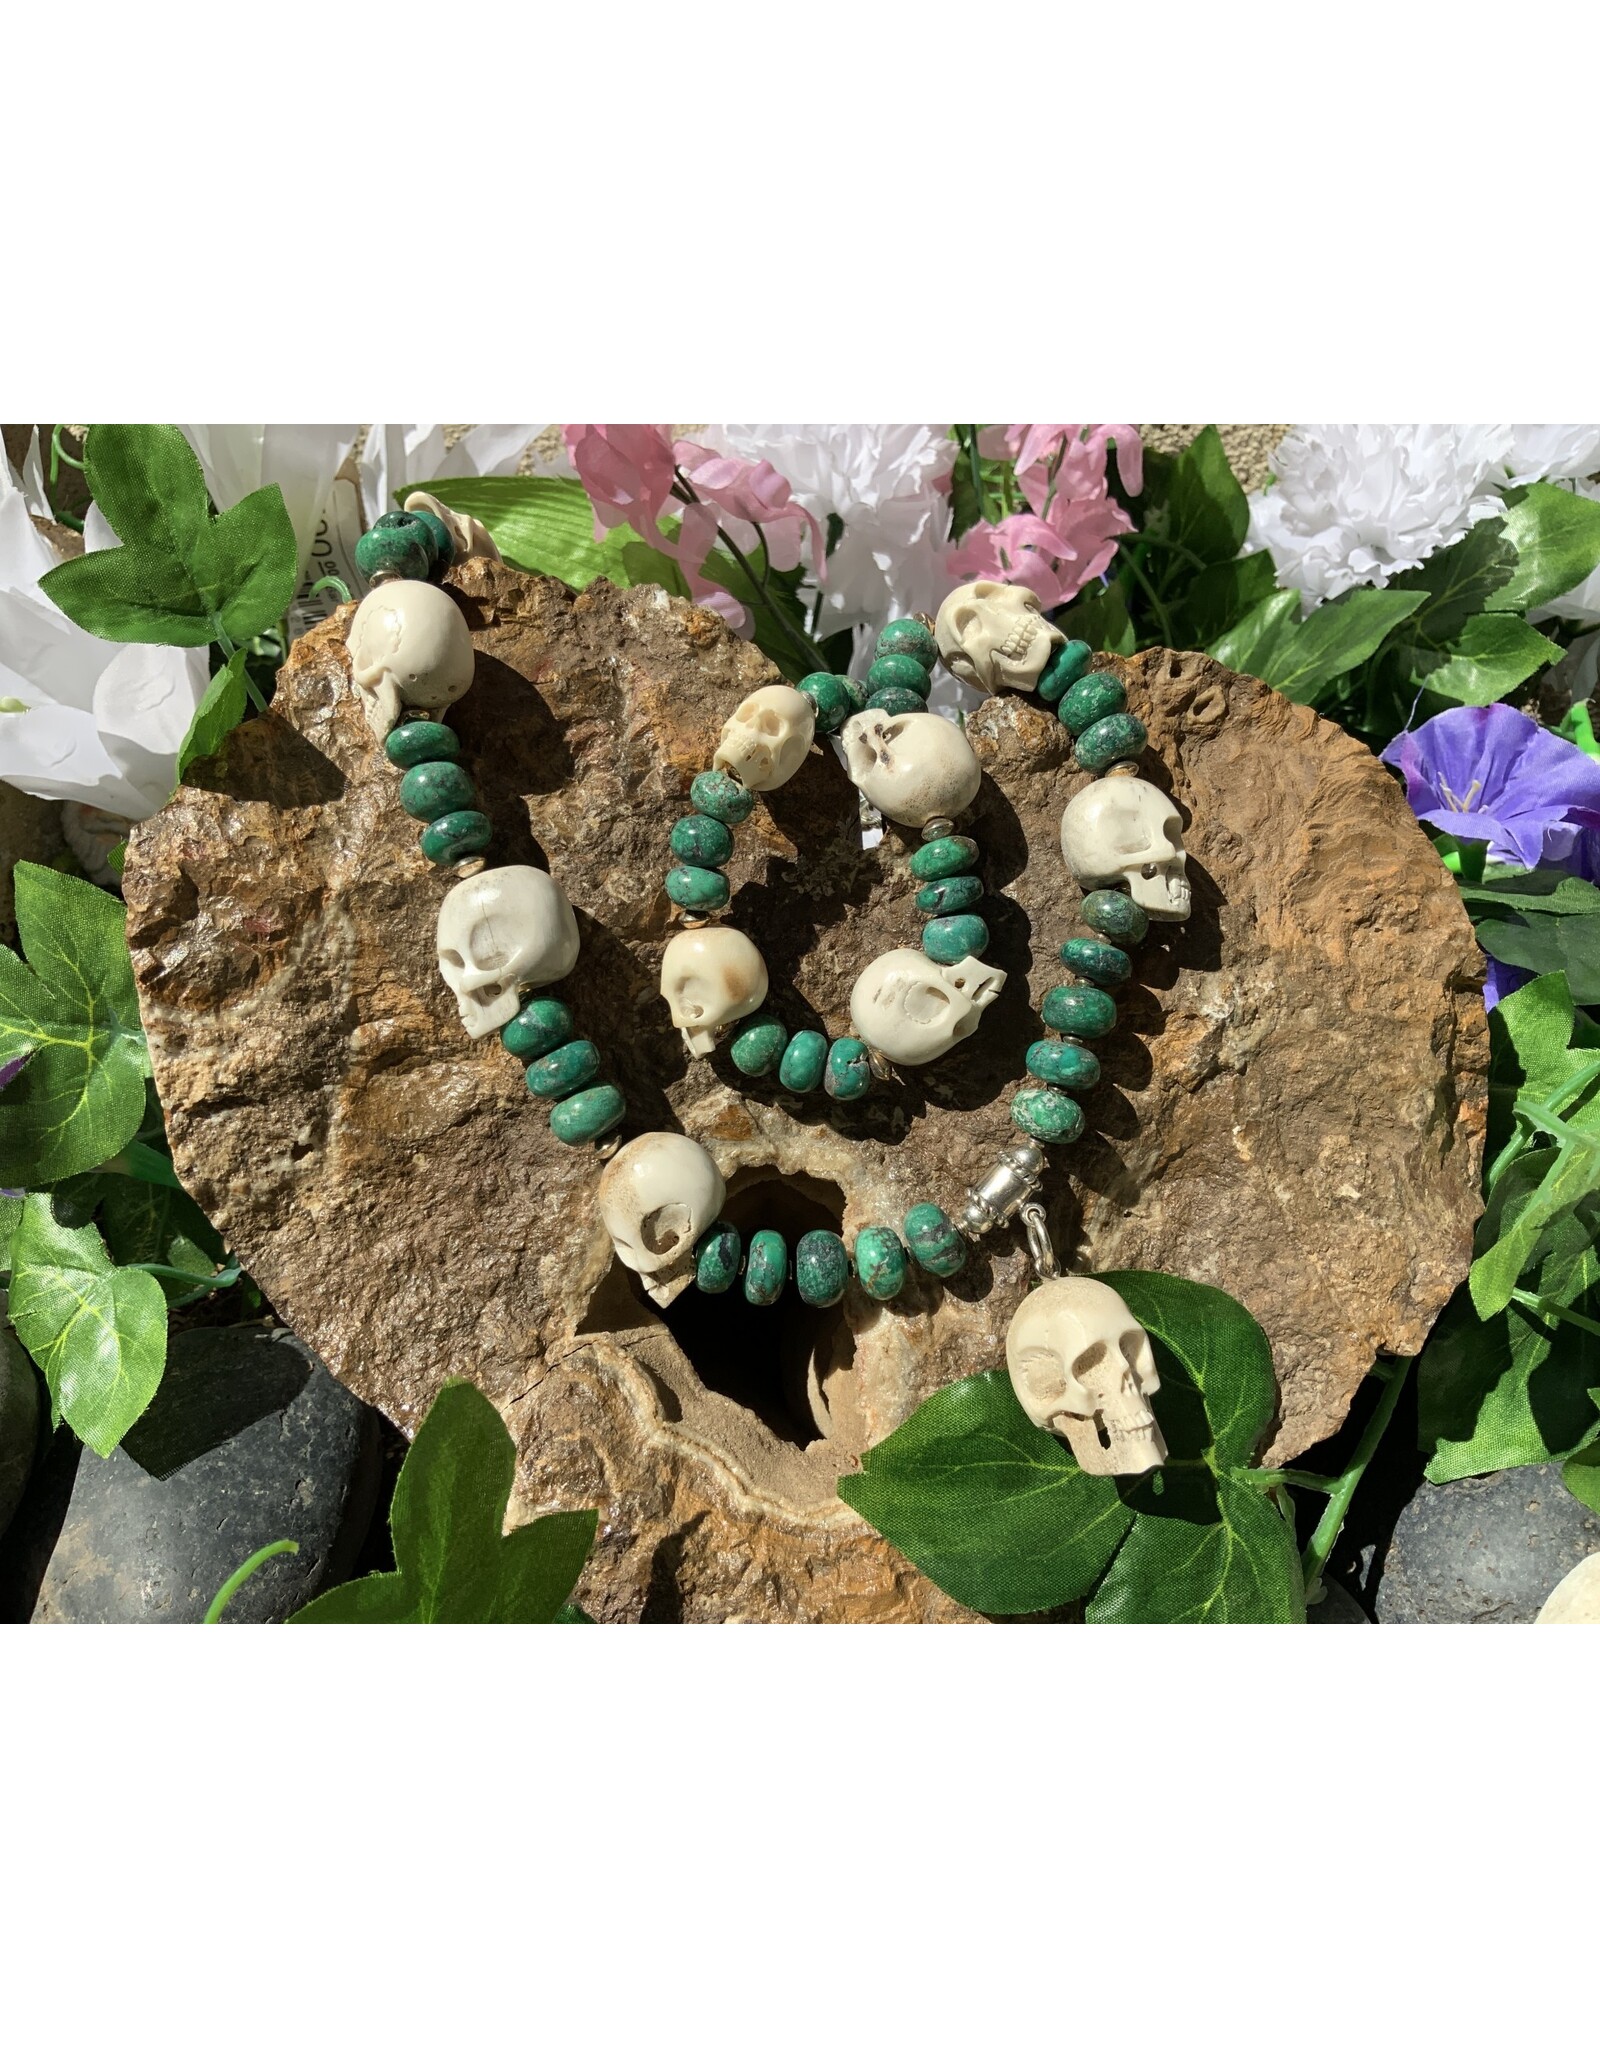 Annette Colby - Jeweler Emerald Valley Turquoise 13 Elk Antler Skull Necklace - AC*